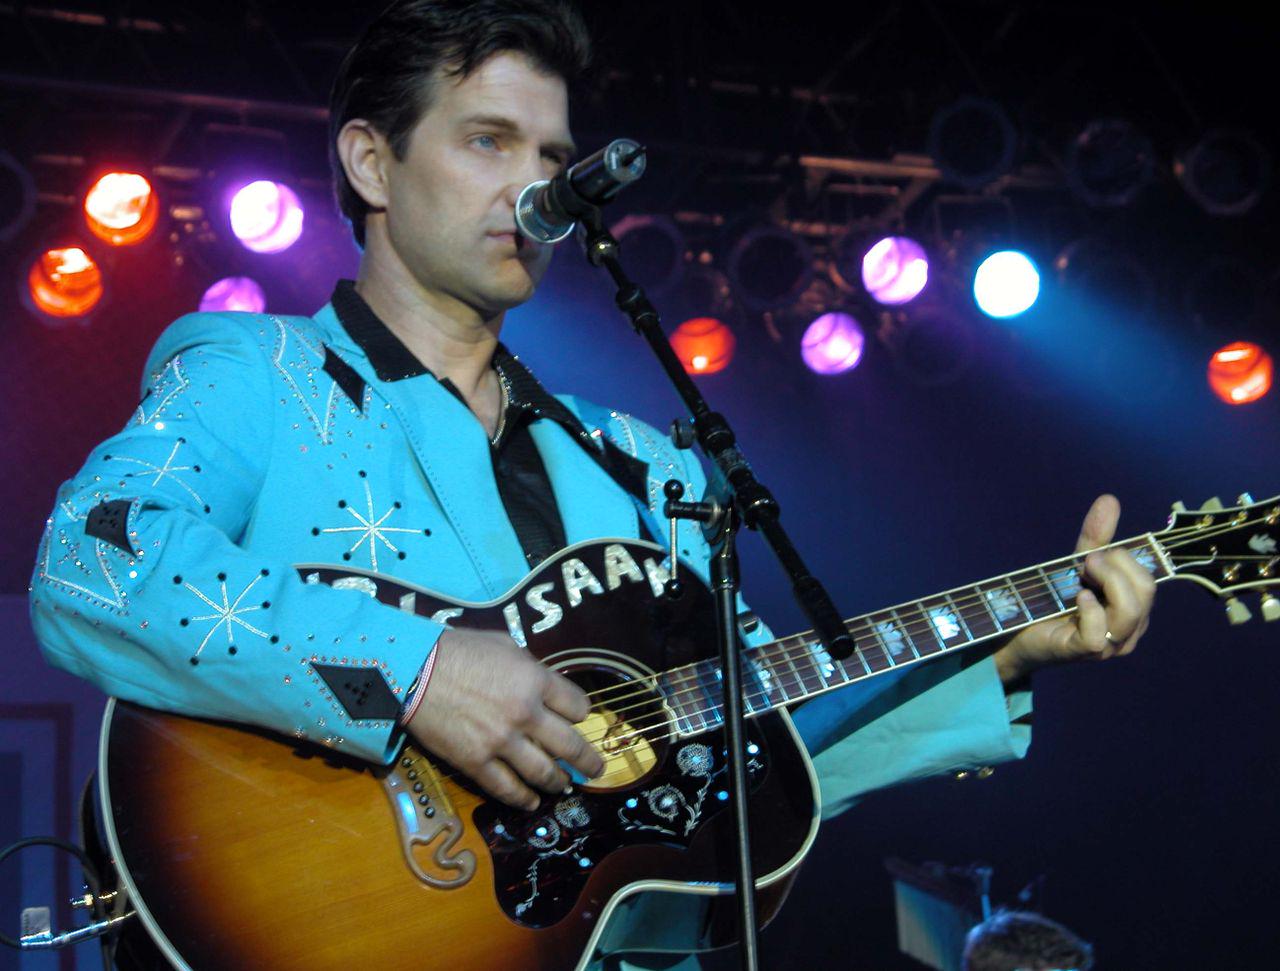 Happy birthday to the great Chris Isaak, King of the Broken Hearts. Born June 26, 1956. 